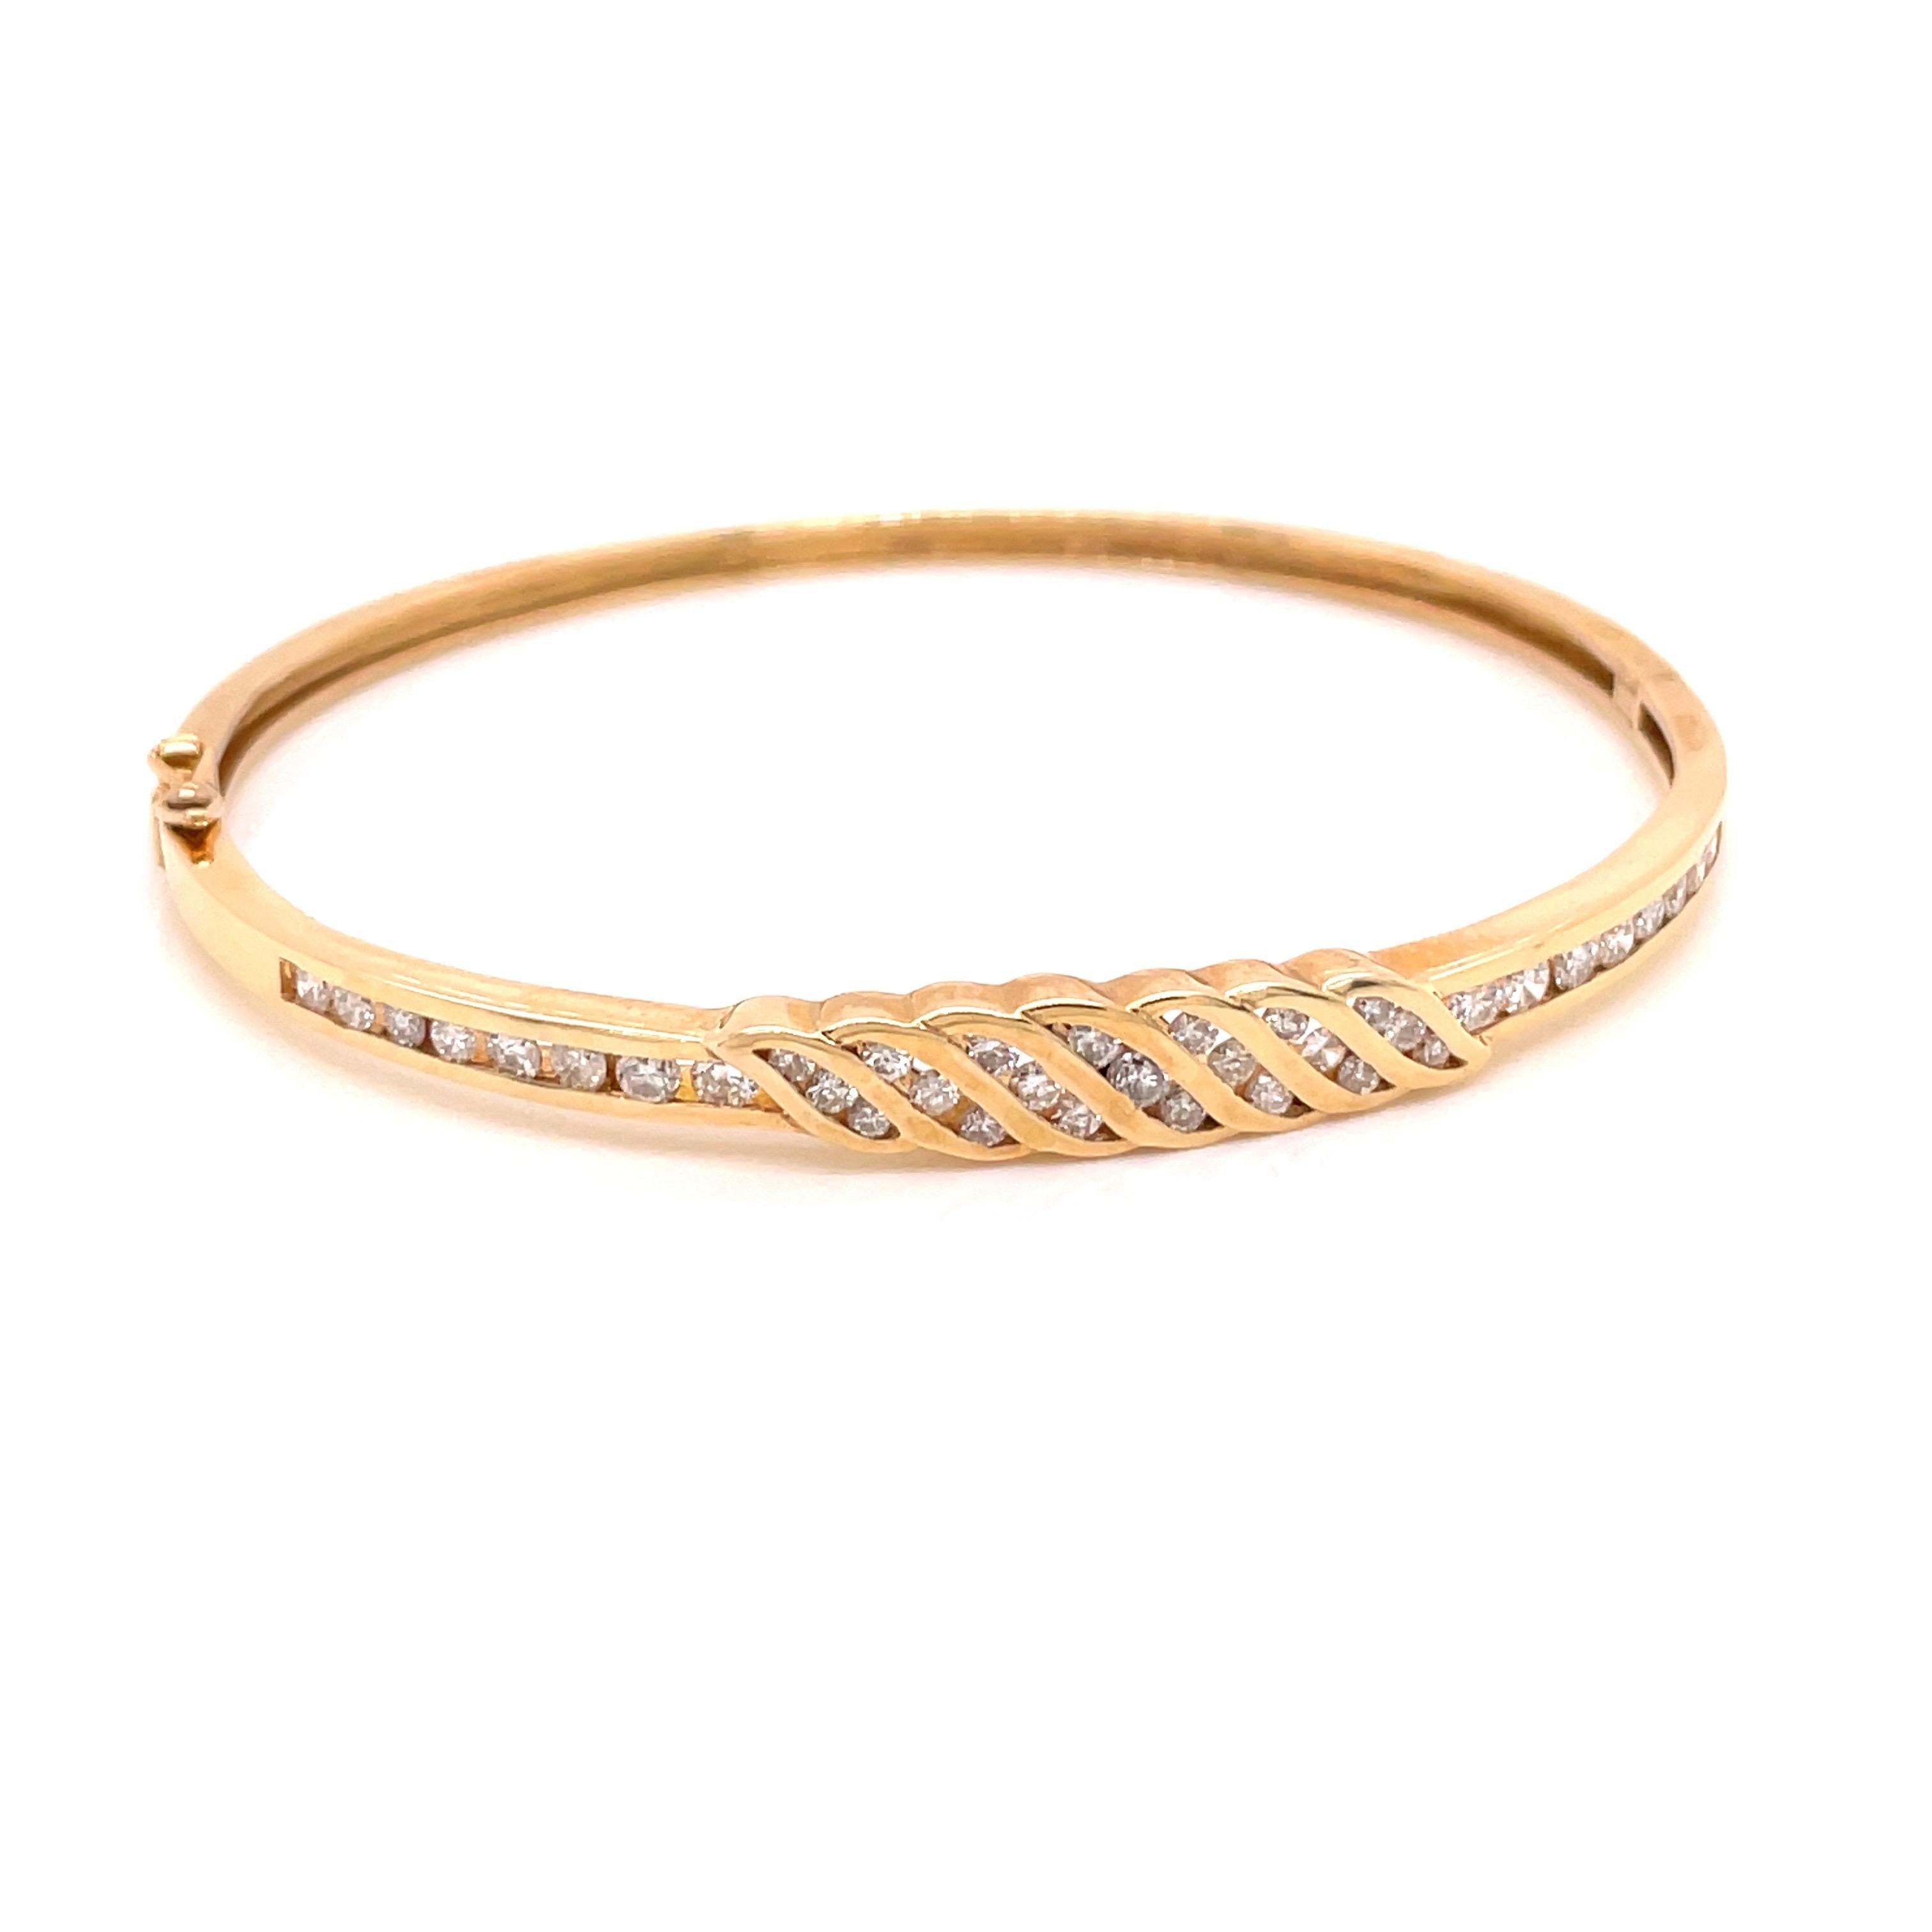 14K Yellow Gold Channel Design Diamond Bangle Bracelet 1.04ct - The bangle is set with 37 round brilliant diamonds weighing 1.04ct with H - I color and SI clarity. The width of the bangle on top is 5.5mm and tapers to 2.5mm on the bottom. The inside